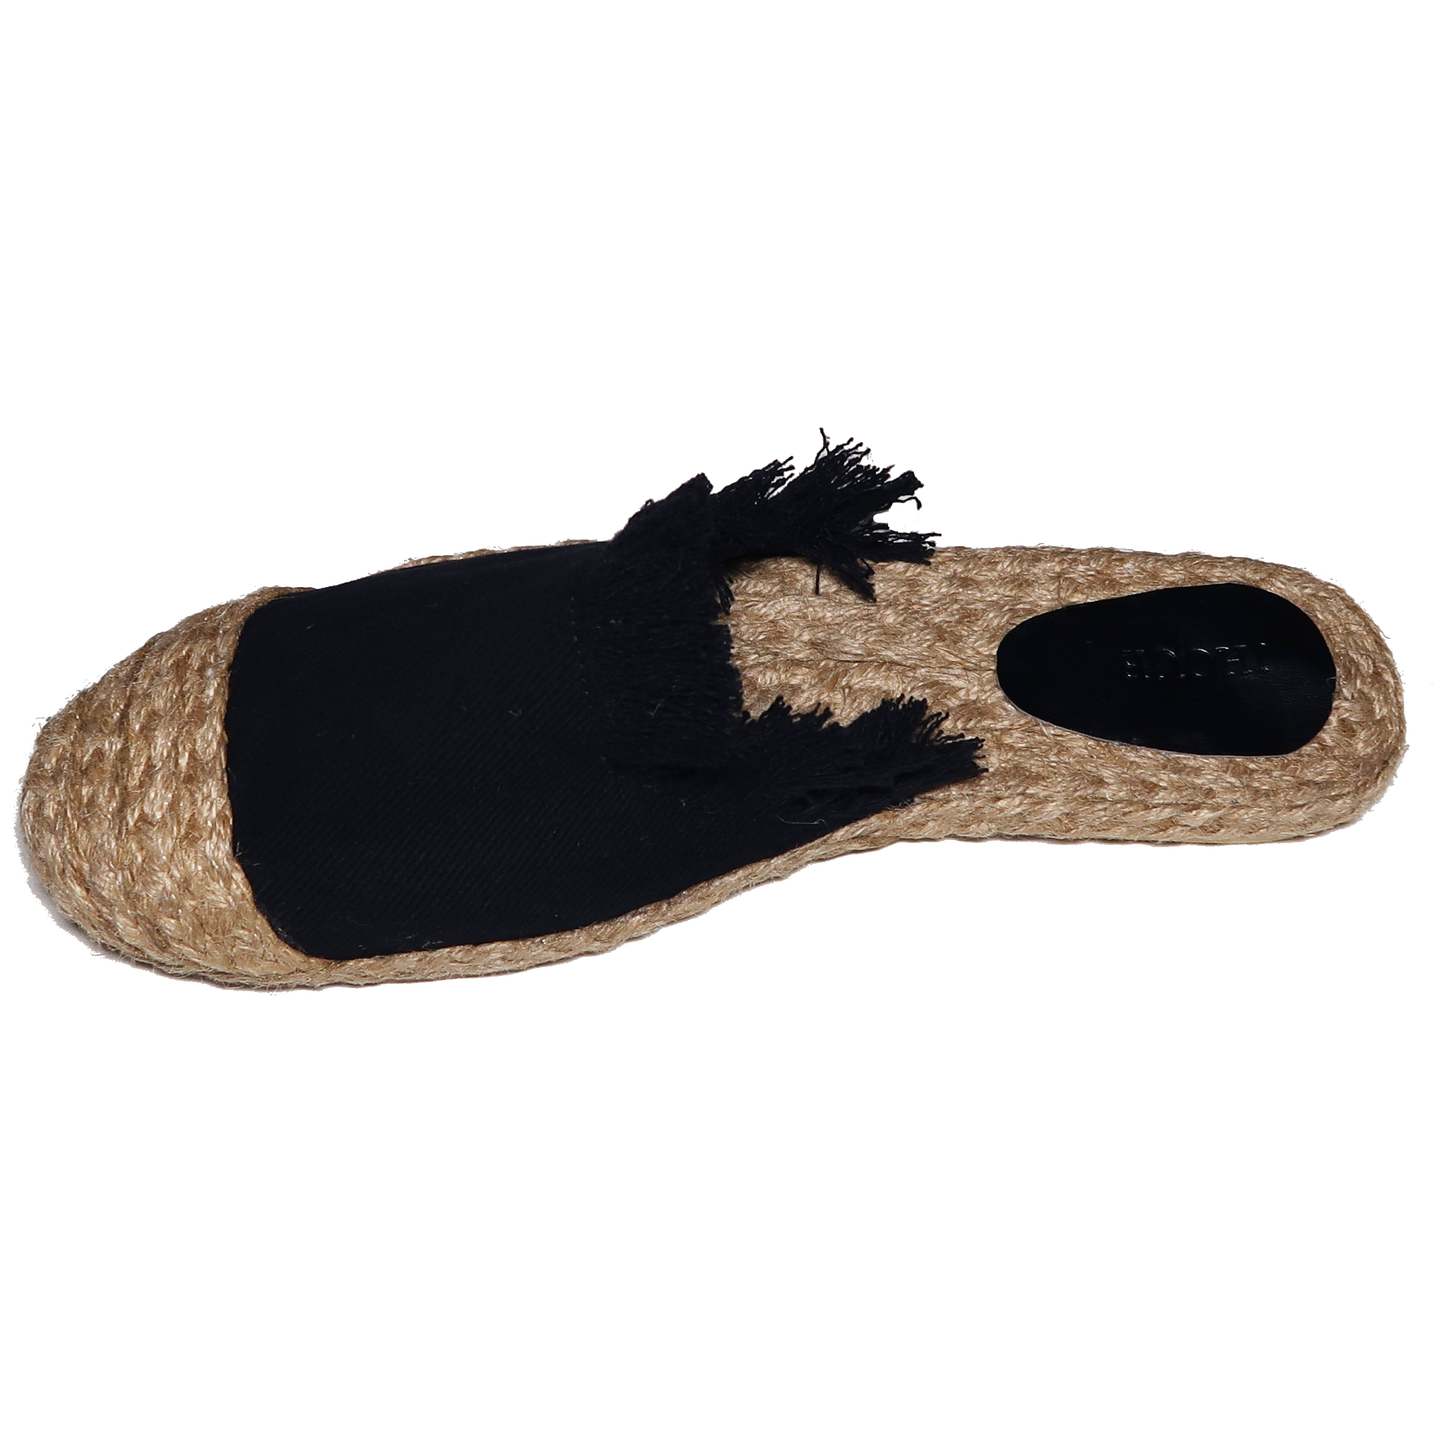 Handmade Abaca Insole Black Ripped Canvas Sandals Slippers Flat Semi Pointed Toe Half Shoes